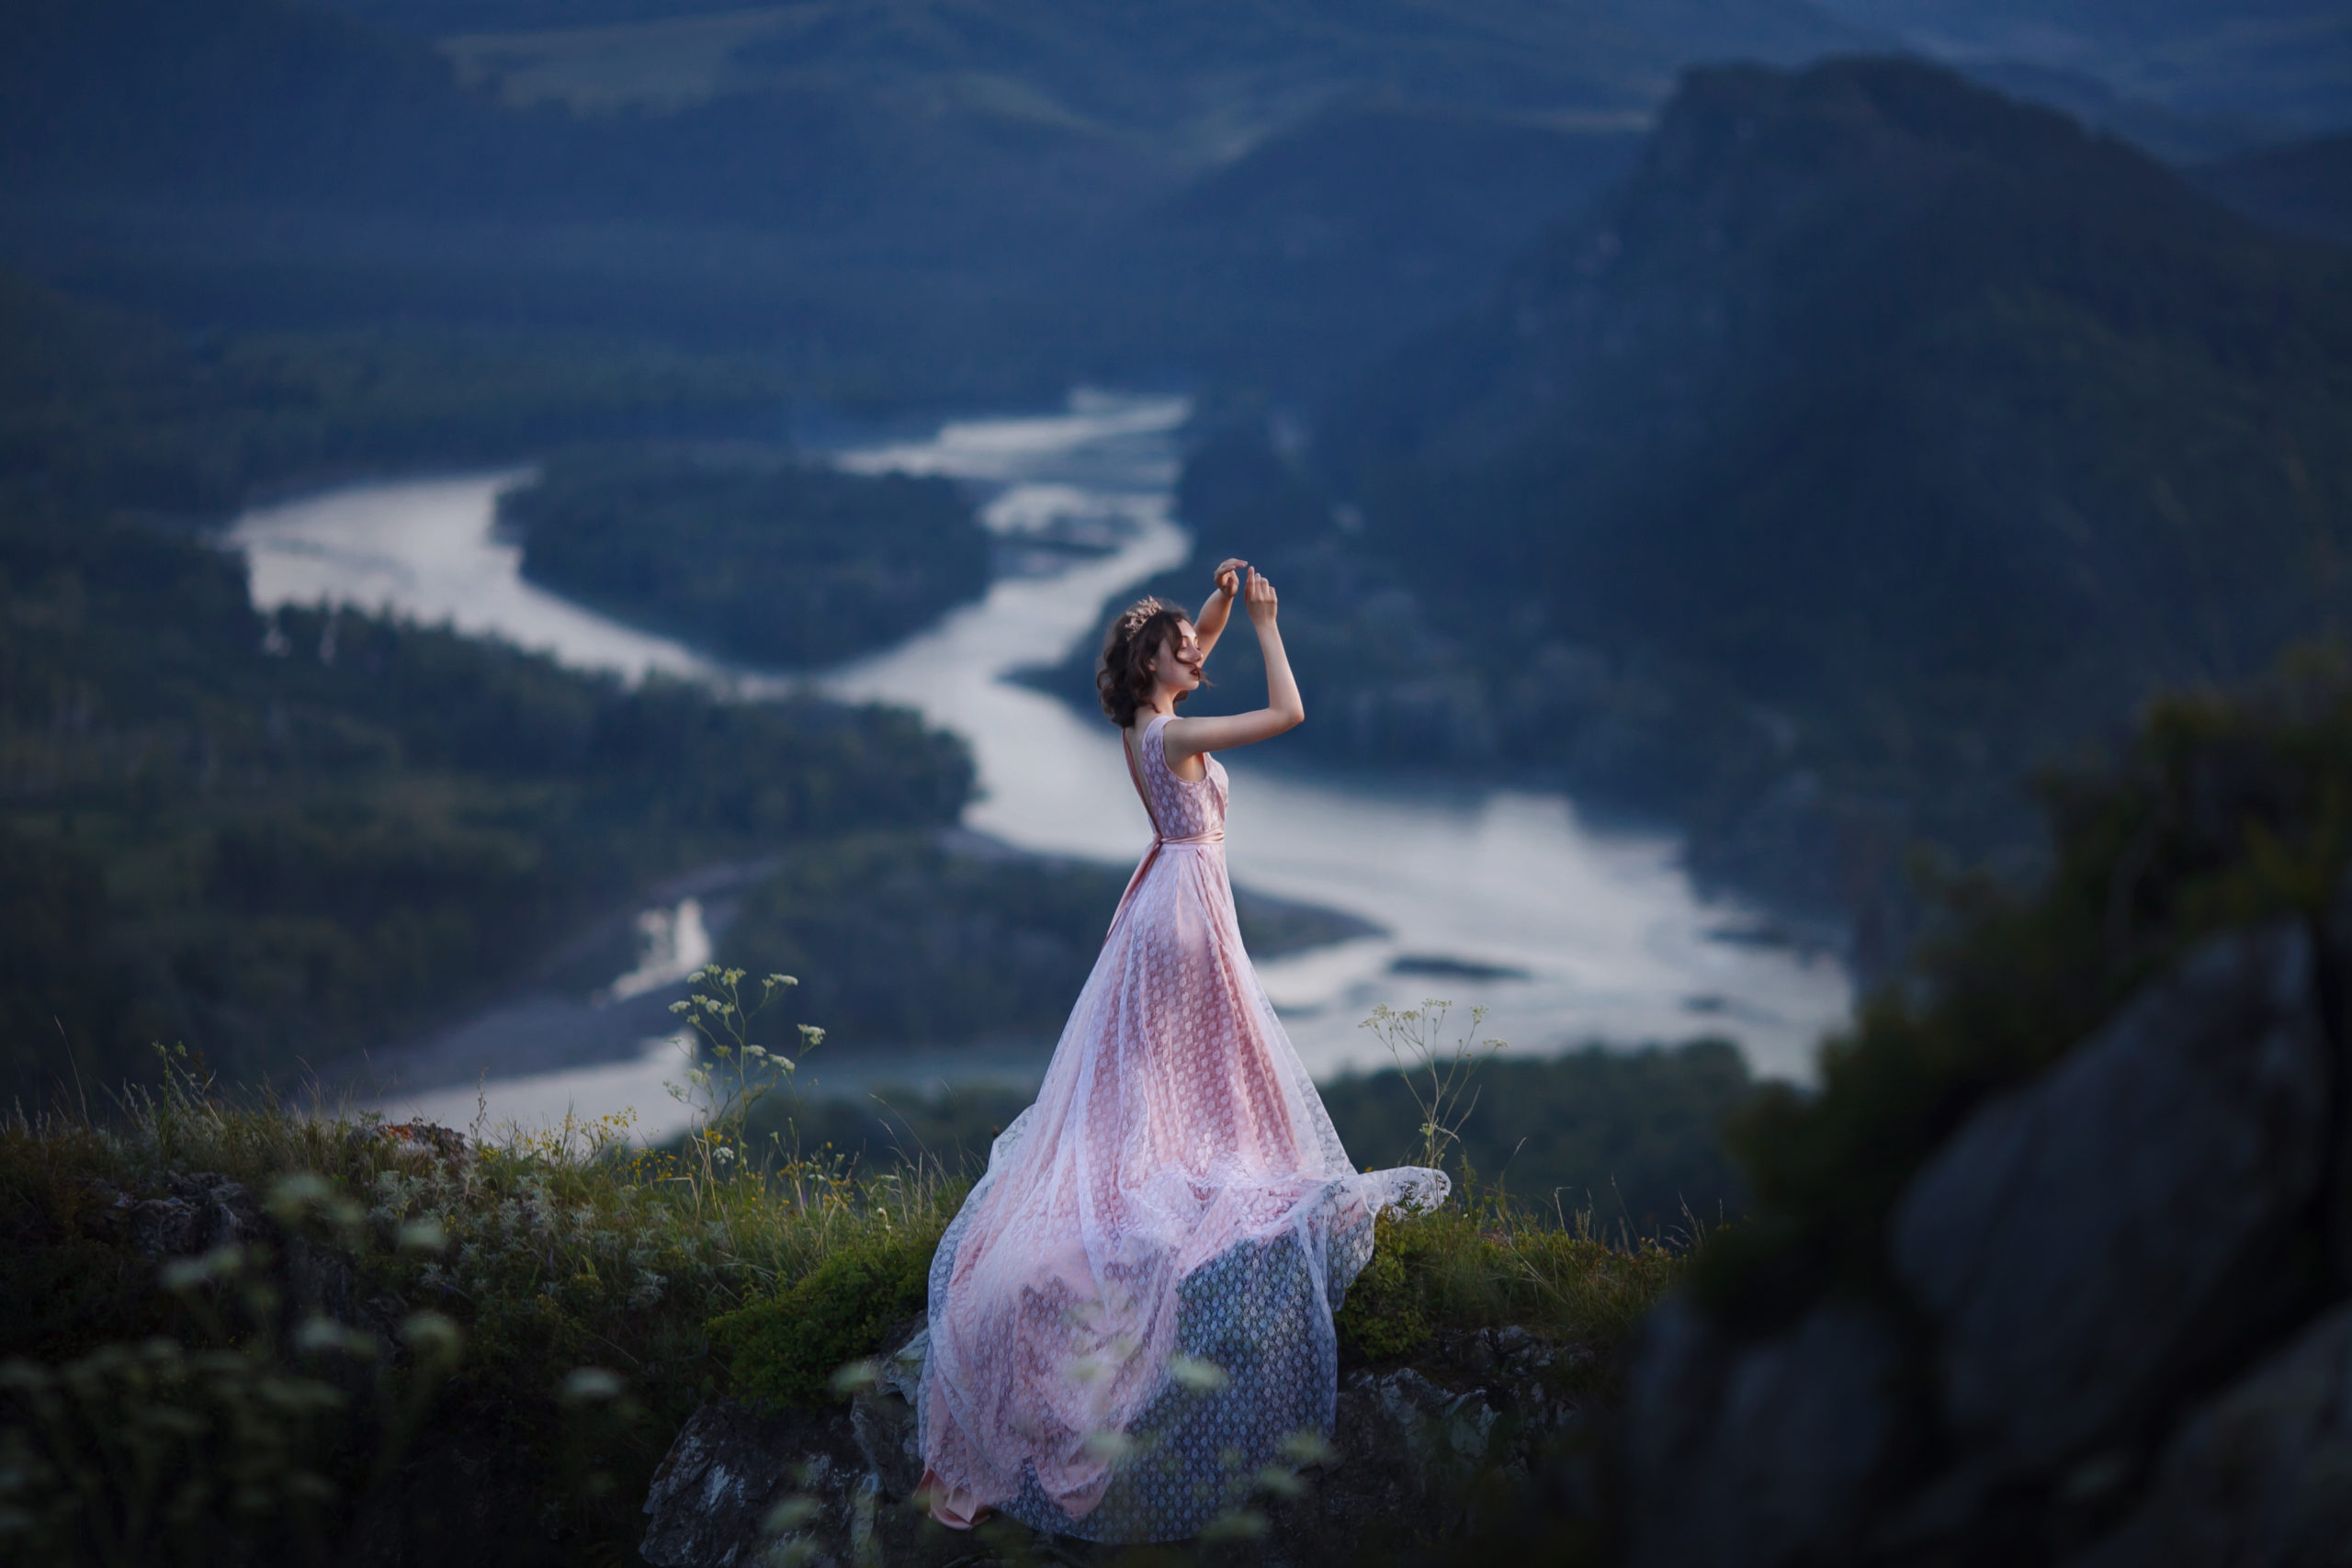 A girl in a pink dress with a long train is dancing on the top of a mountain.